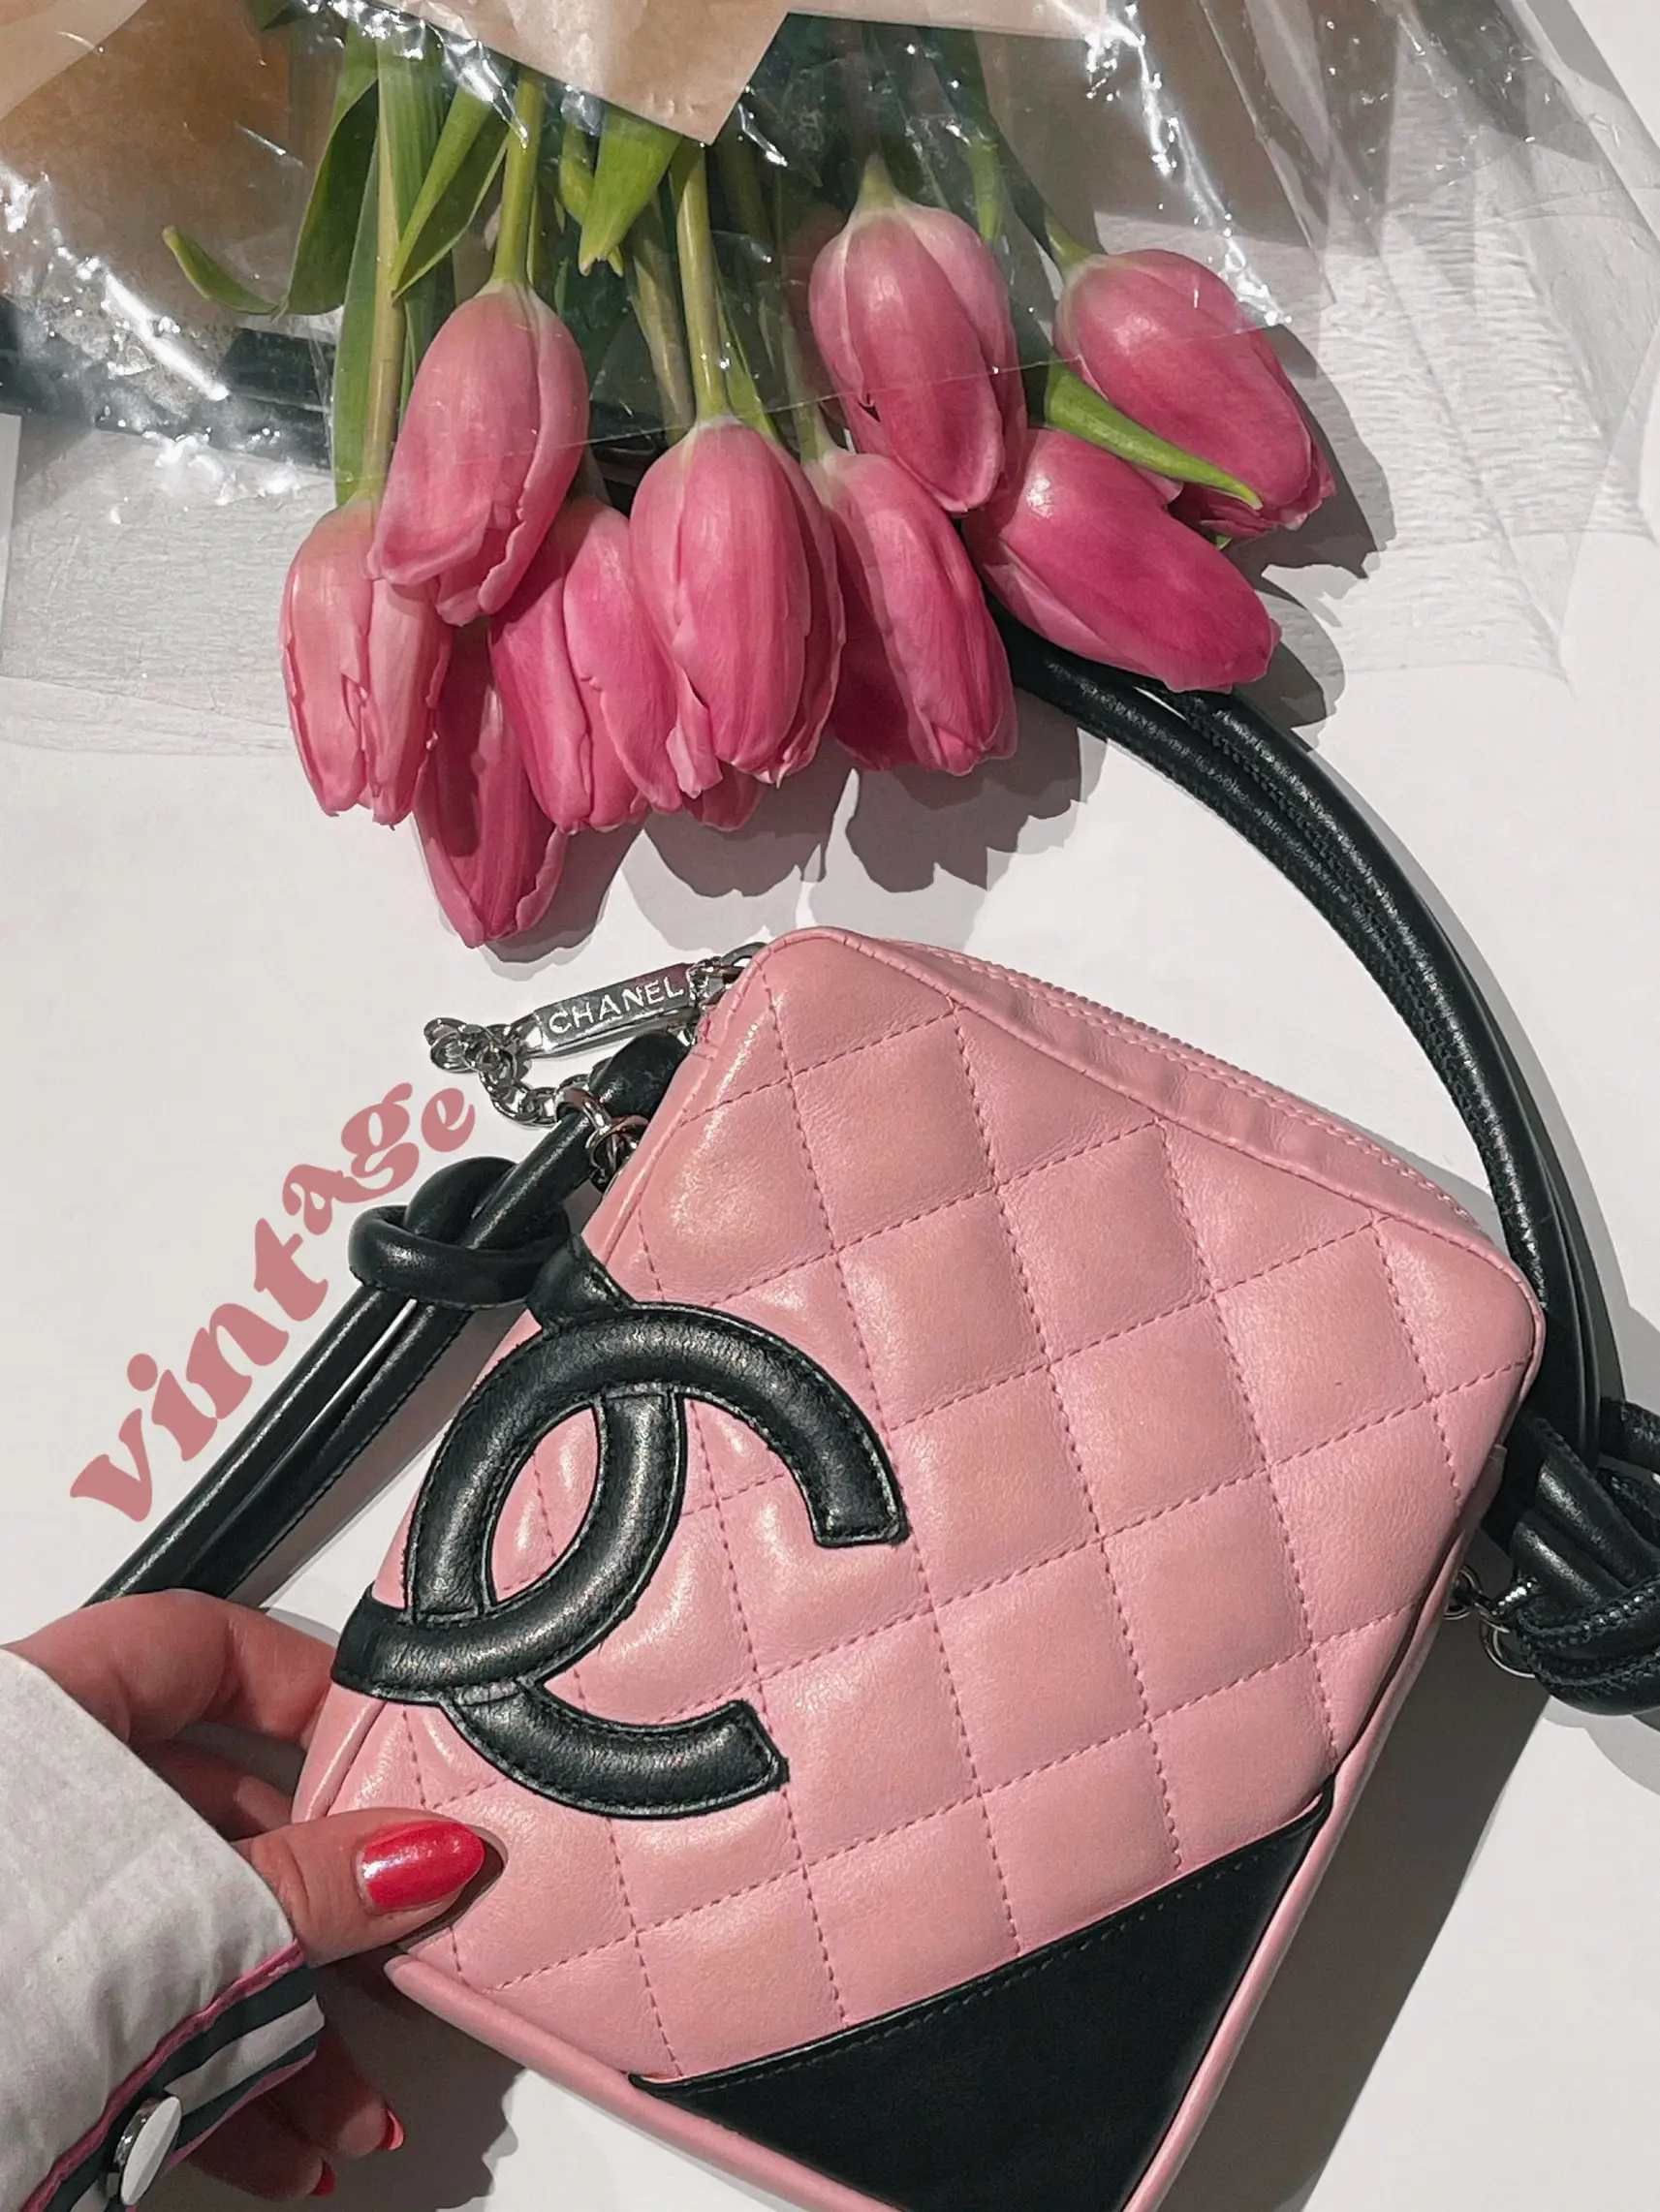 Up Close - #Chanel bag and necklaces. See previous post for full look and  additional info.